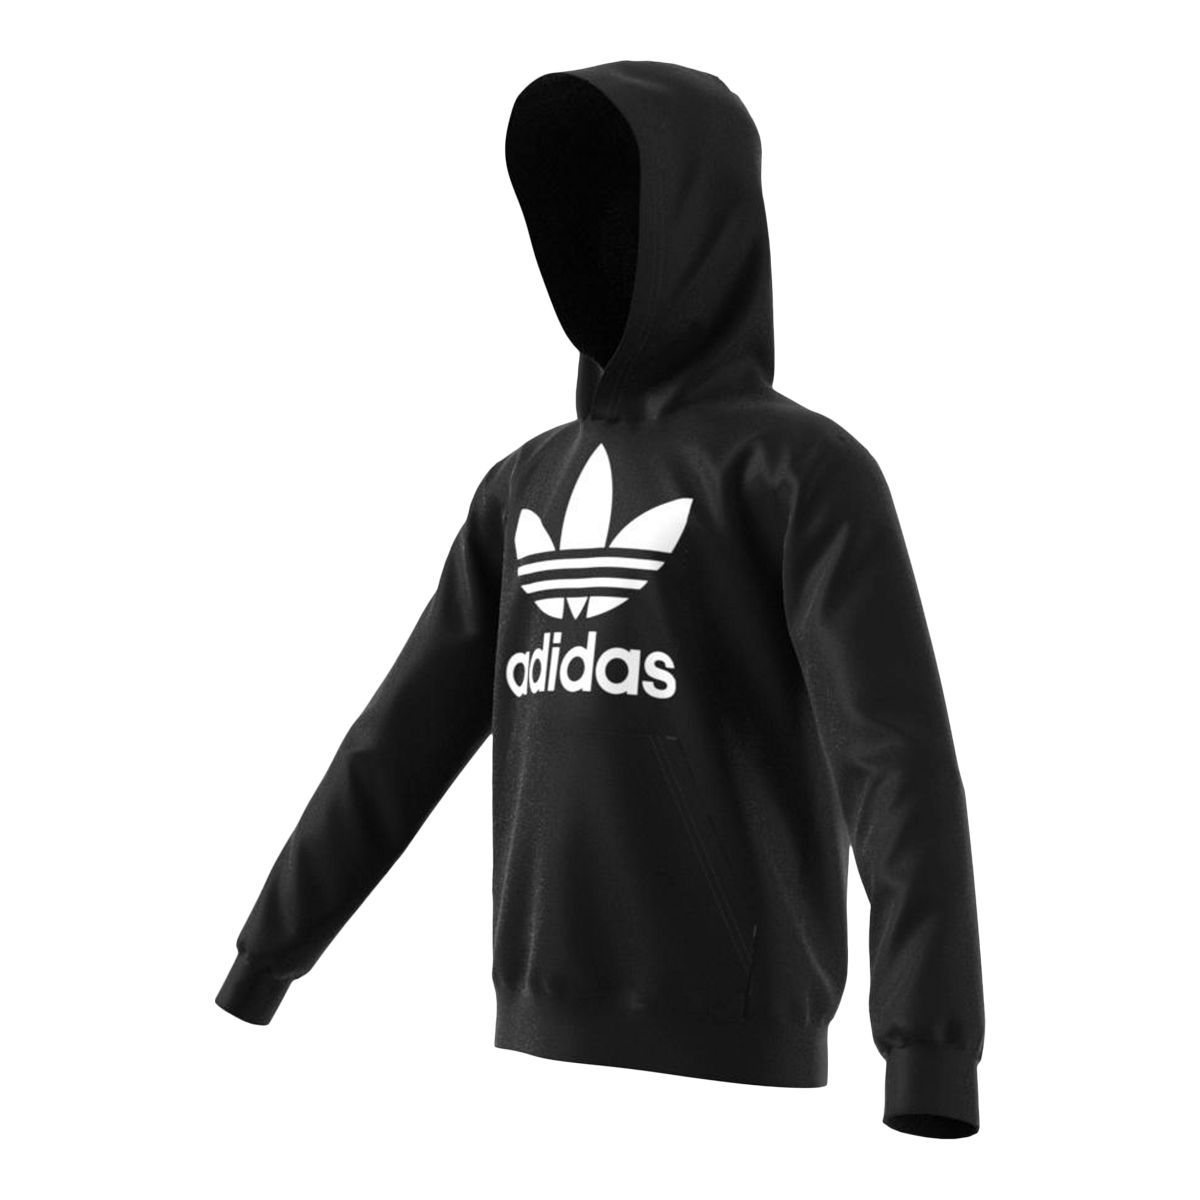 Adidas Originals Boys' Trefoil Kids' Pullover French Terry Kangaroo | Southcentre Mall